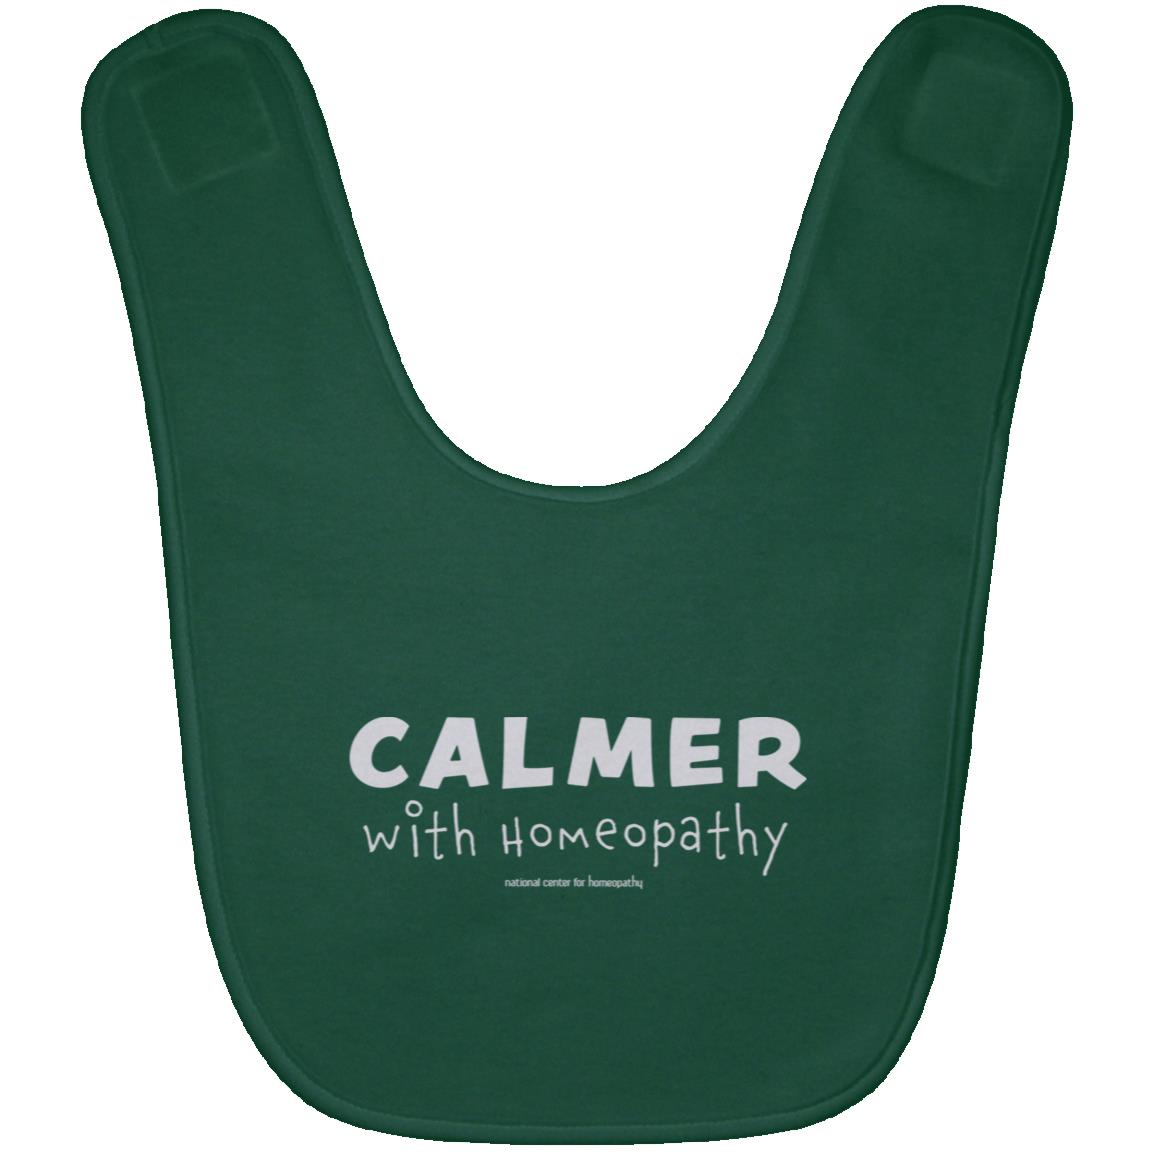 Calmer with Homeopathy Baby Bib - Multiple Colors